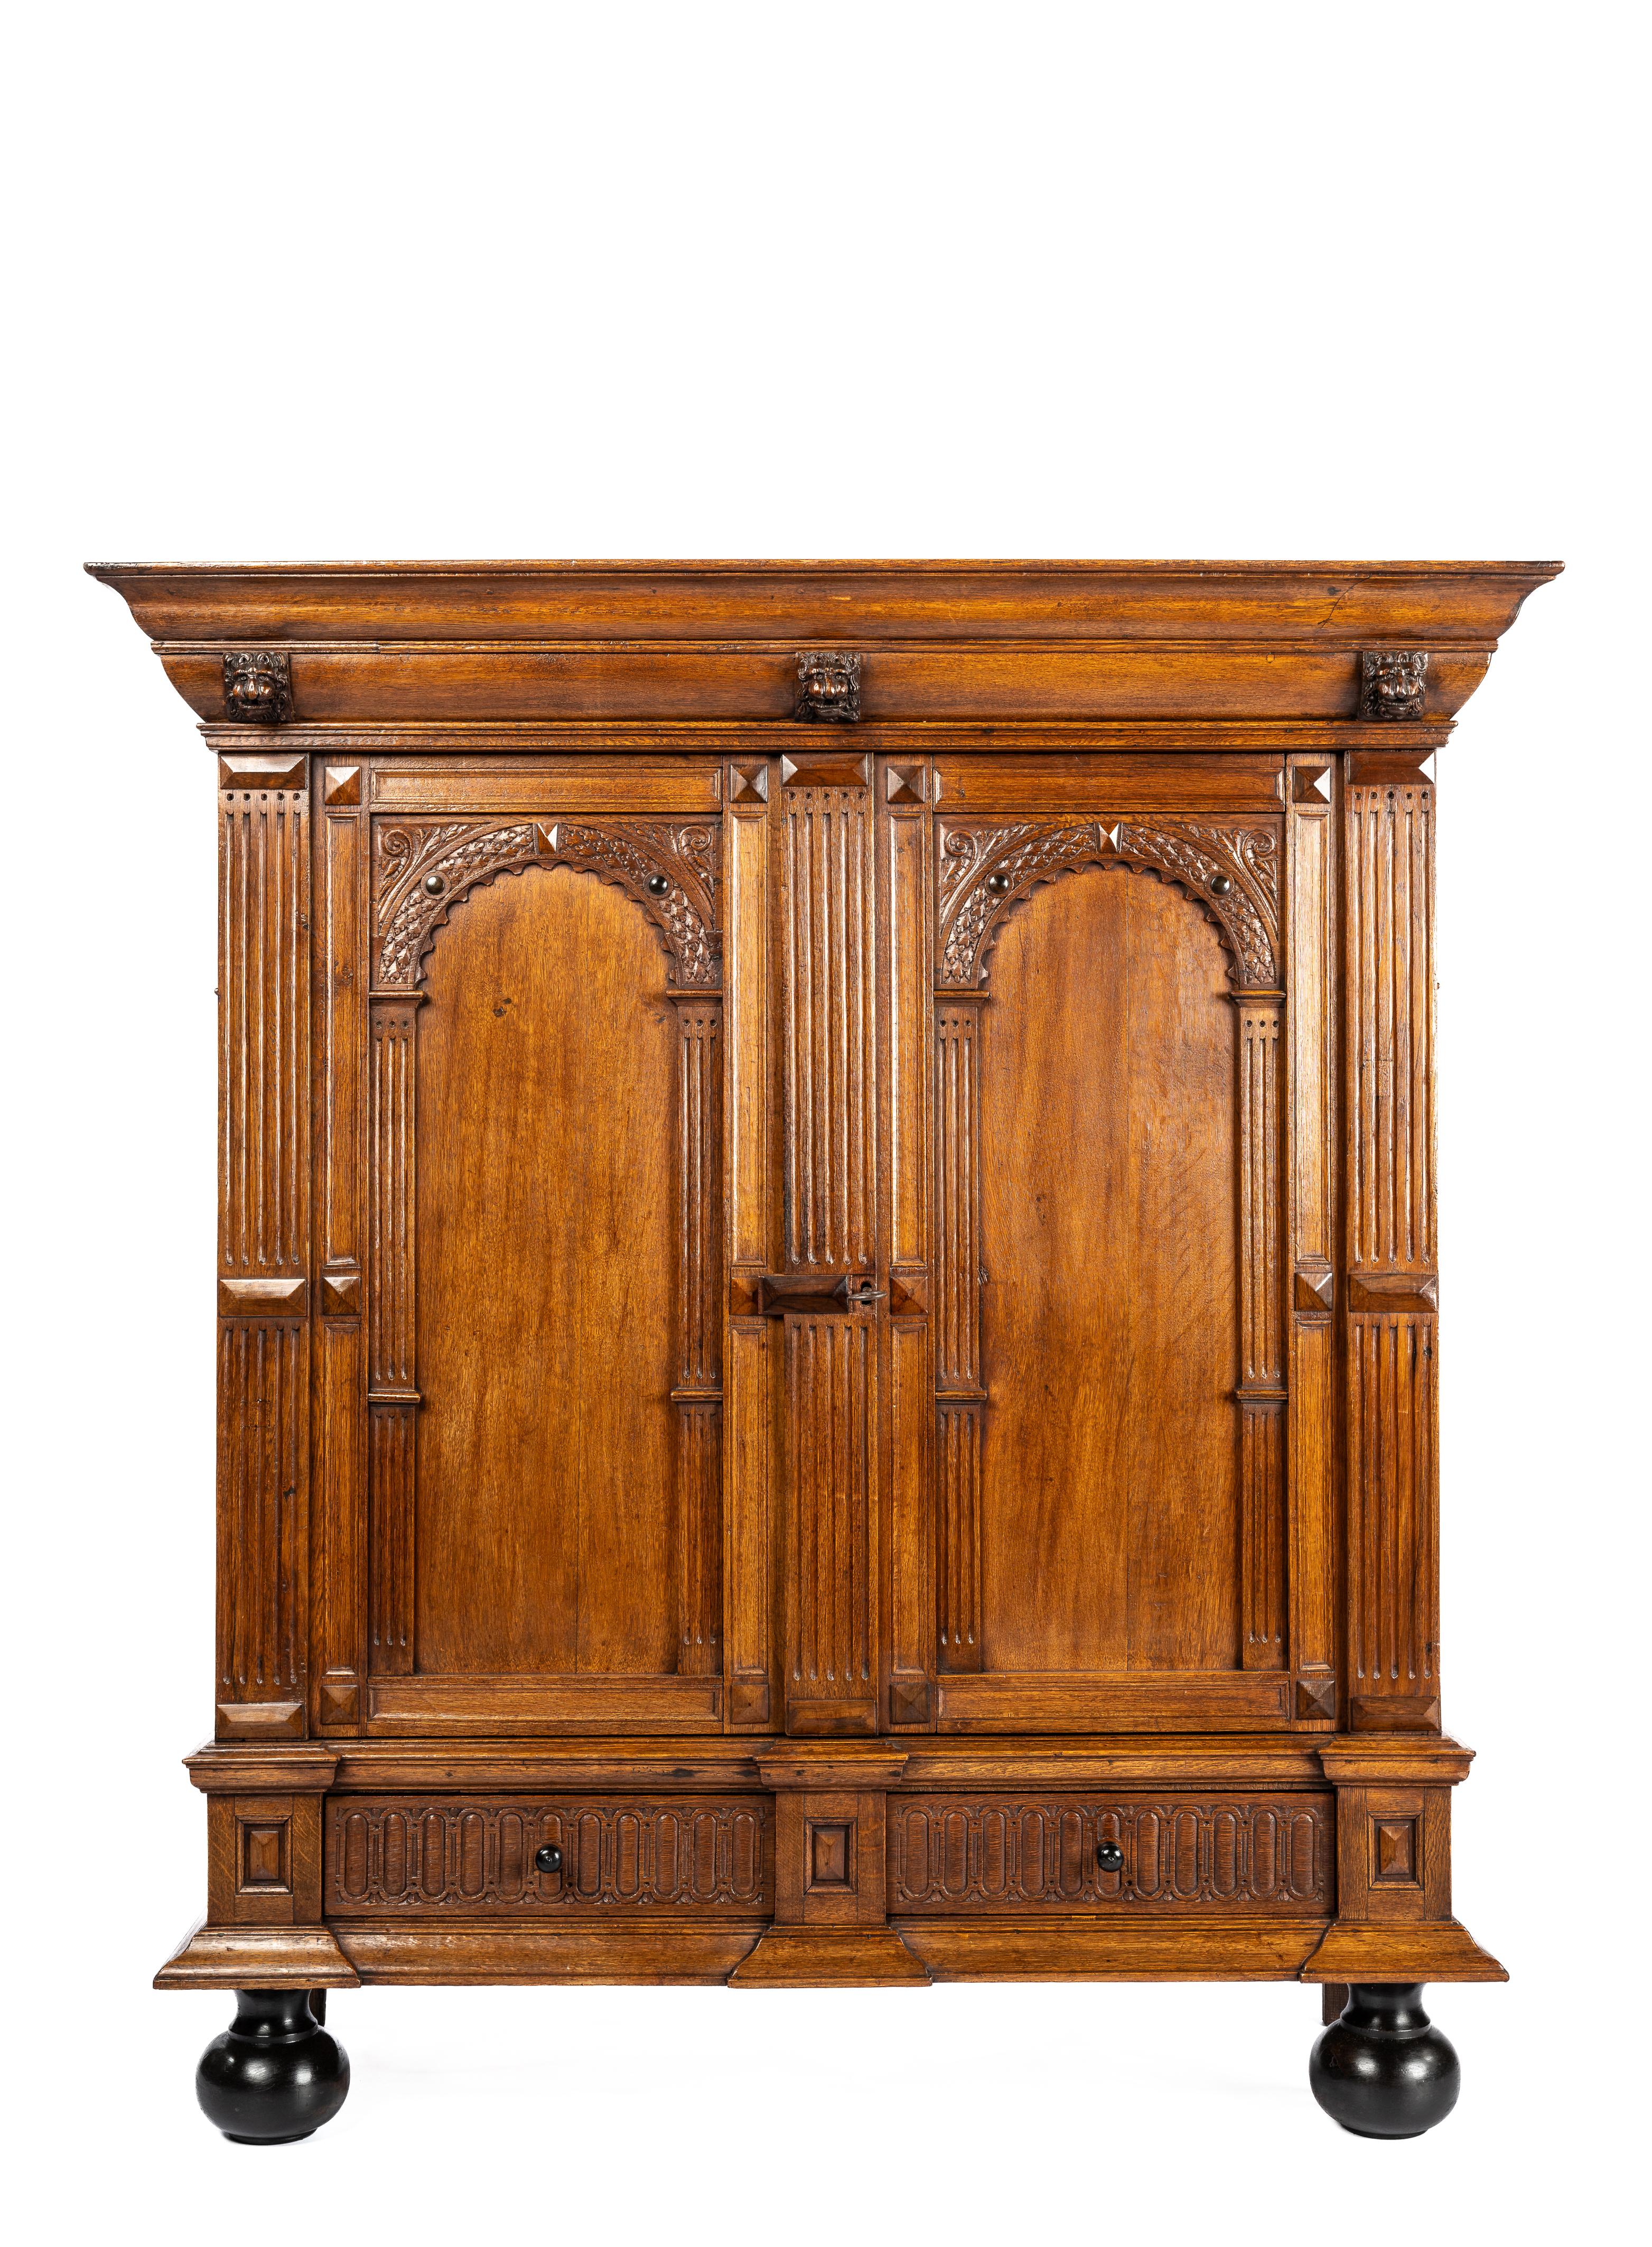 Featured here is an exquisite antique Dutch cupboard crafted from the finest European summer oak, meticulously following the Dutch Renaissance tradition during the 